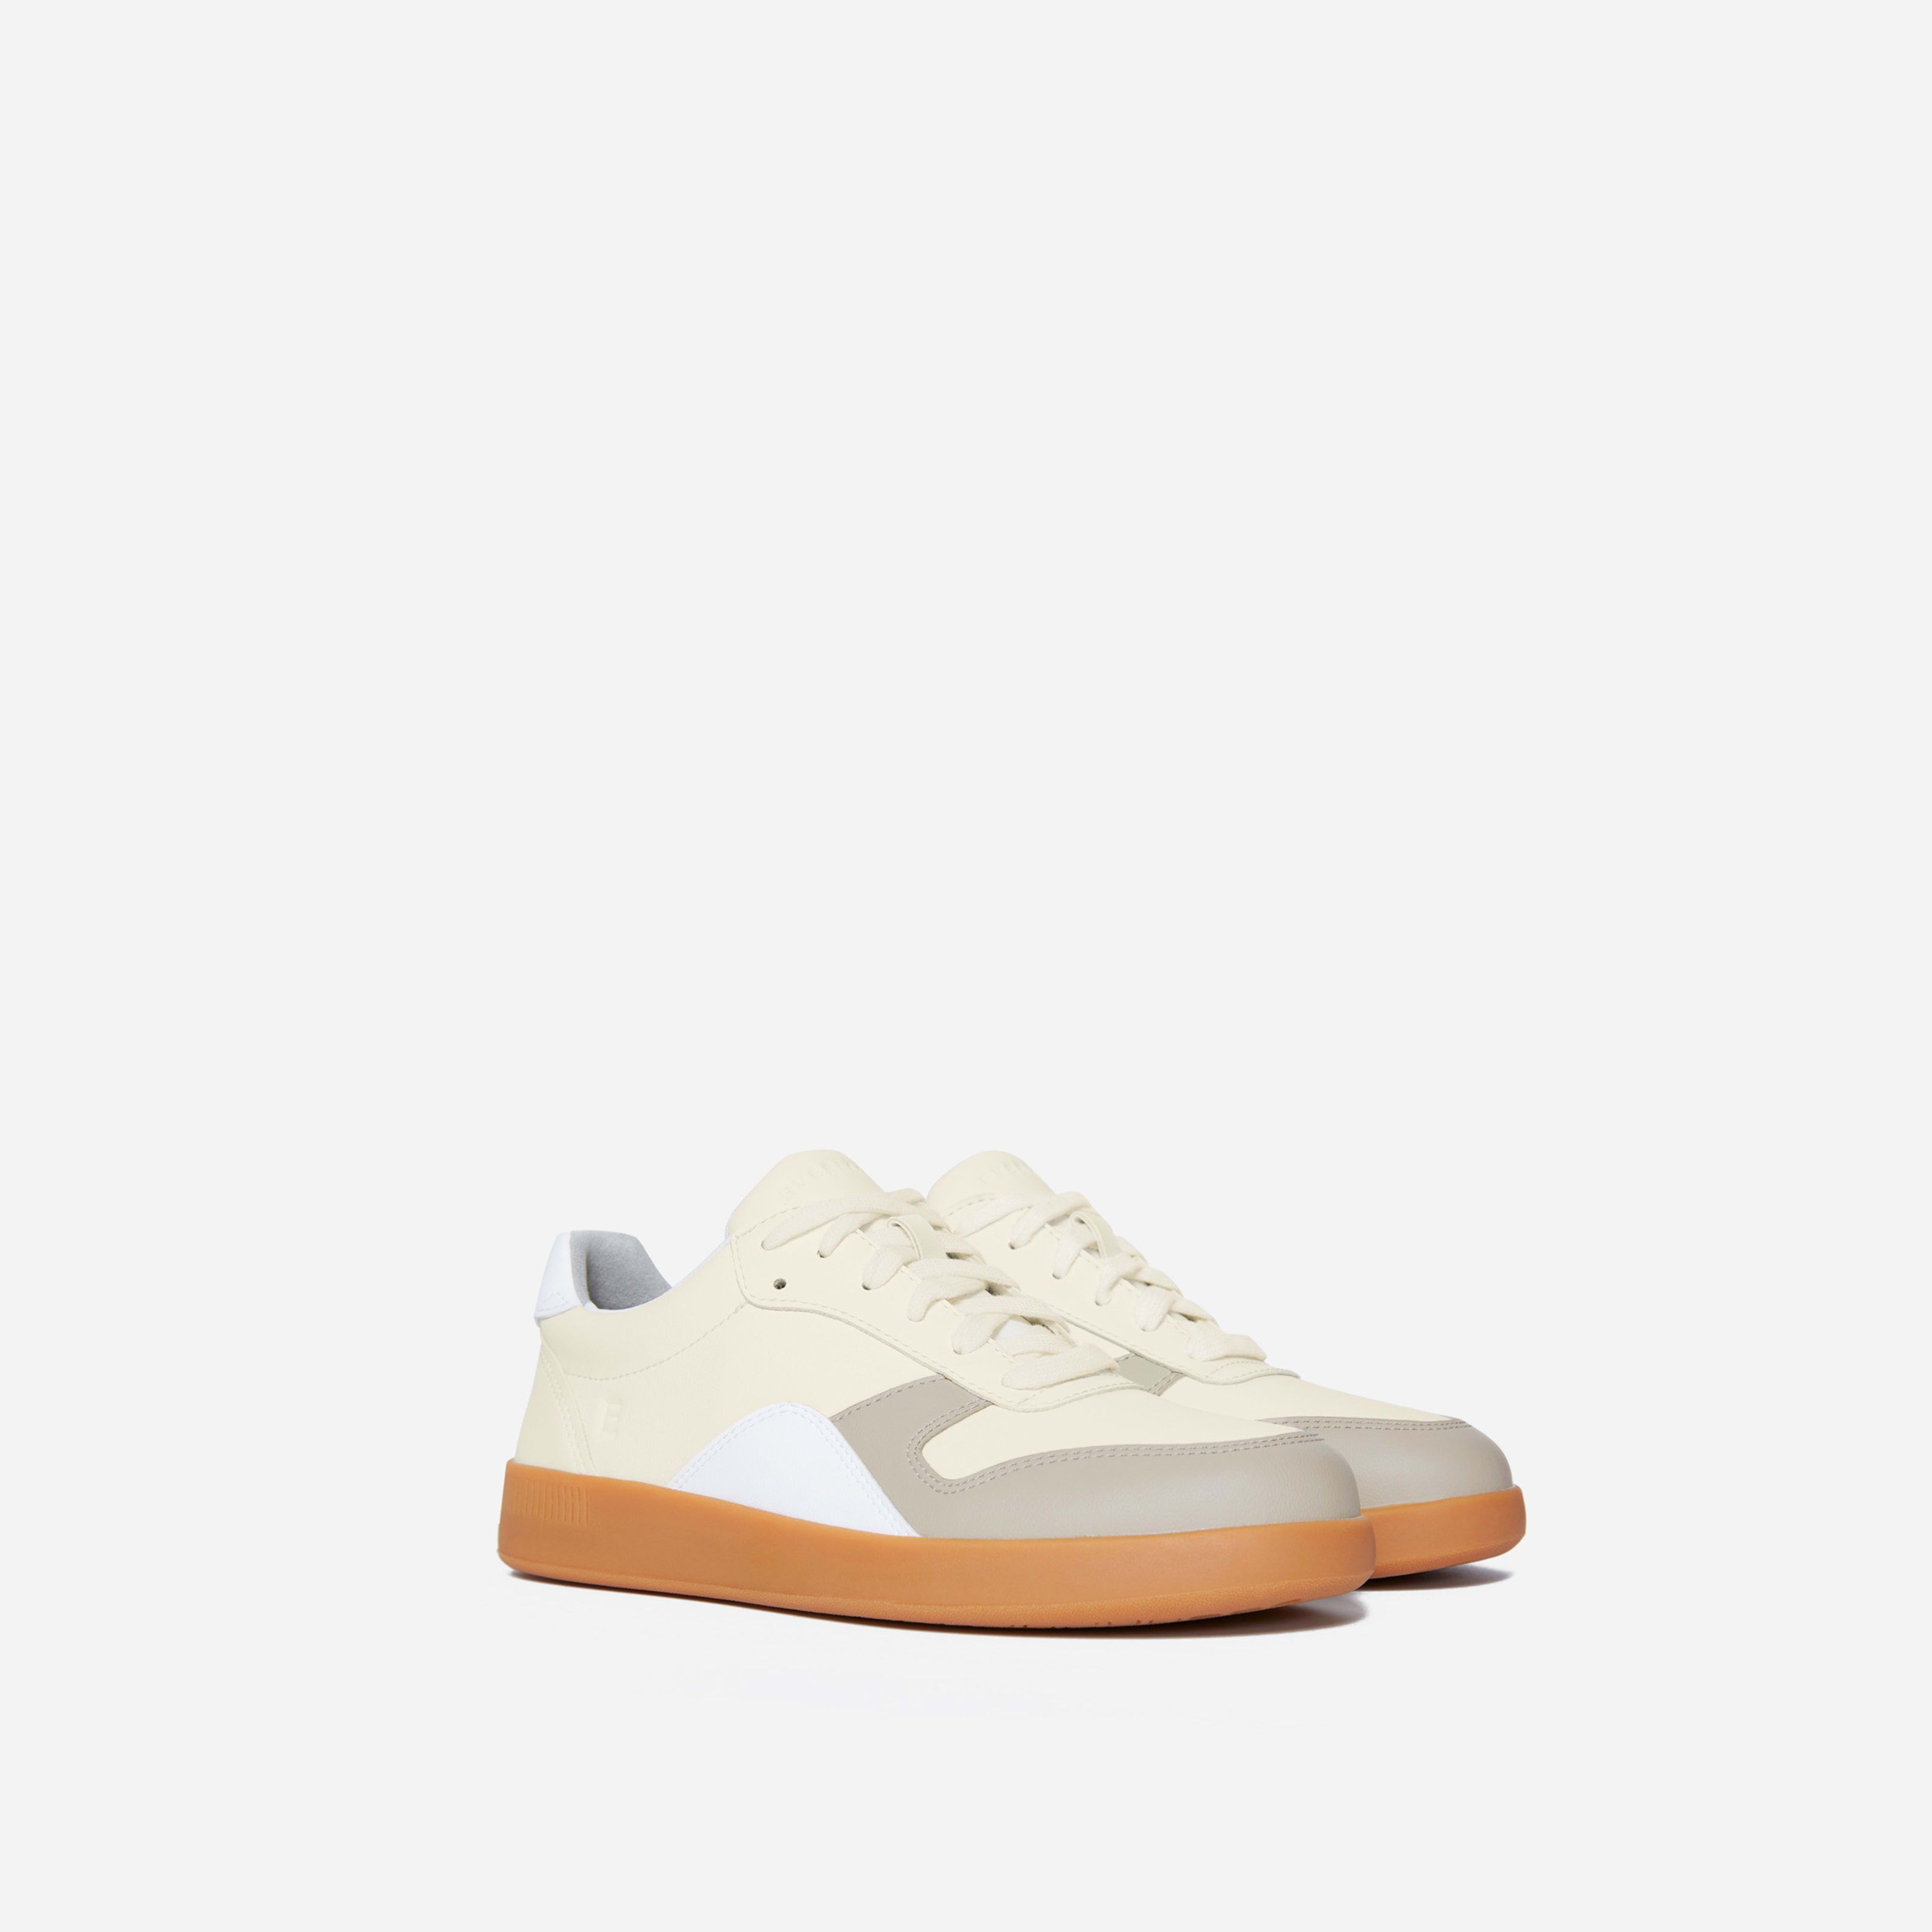 Women's ReLeather Court Sneaker by Everlane in Off-White/Light Grey, Size W5.5M3.5 | Everlane